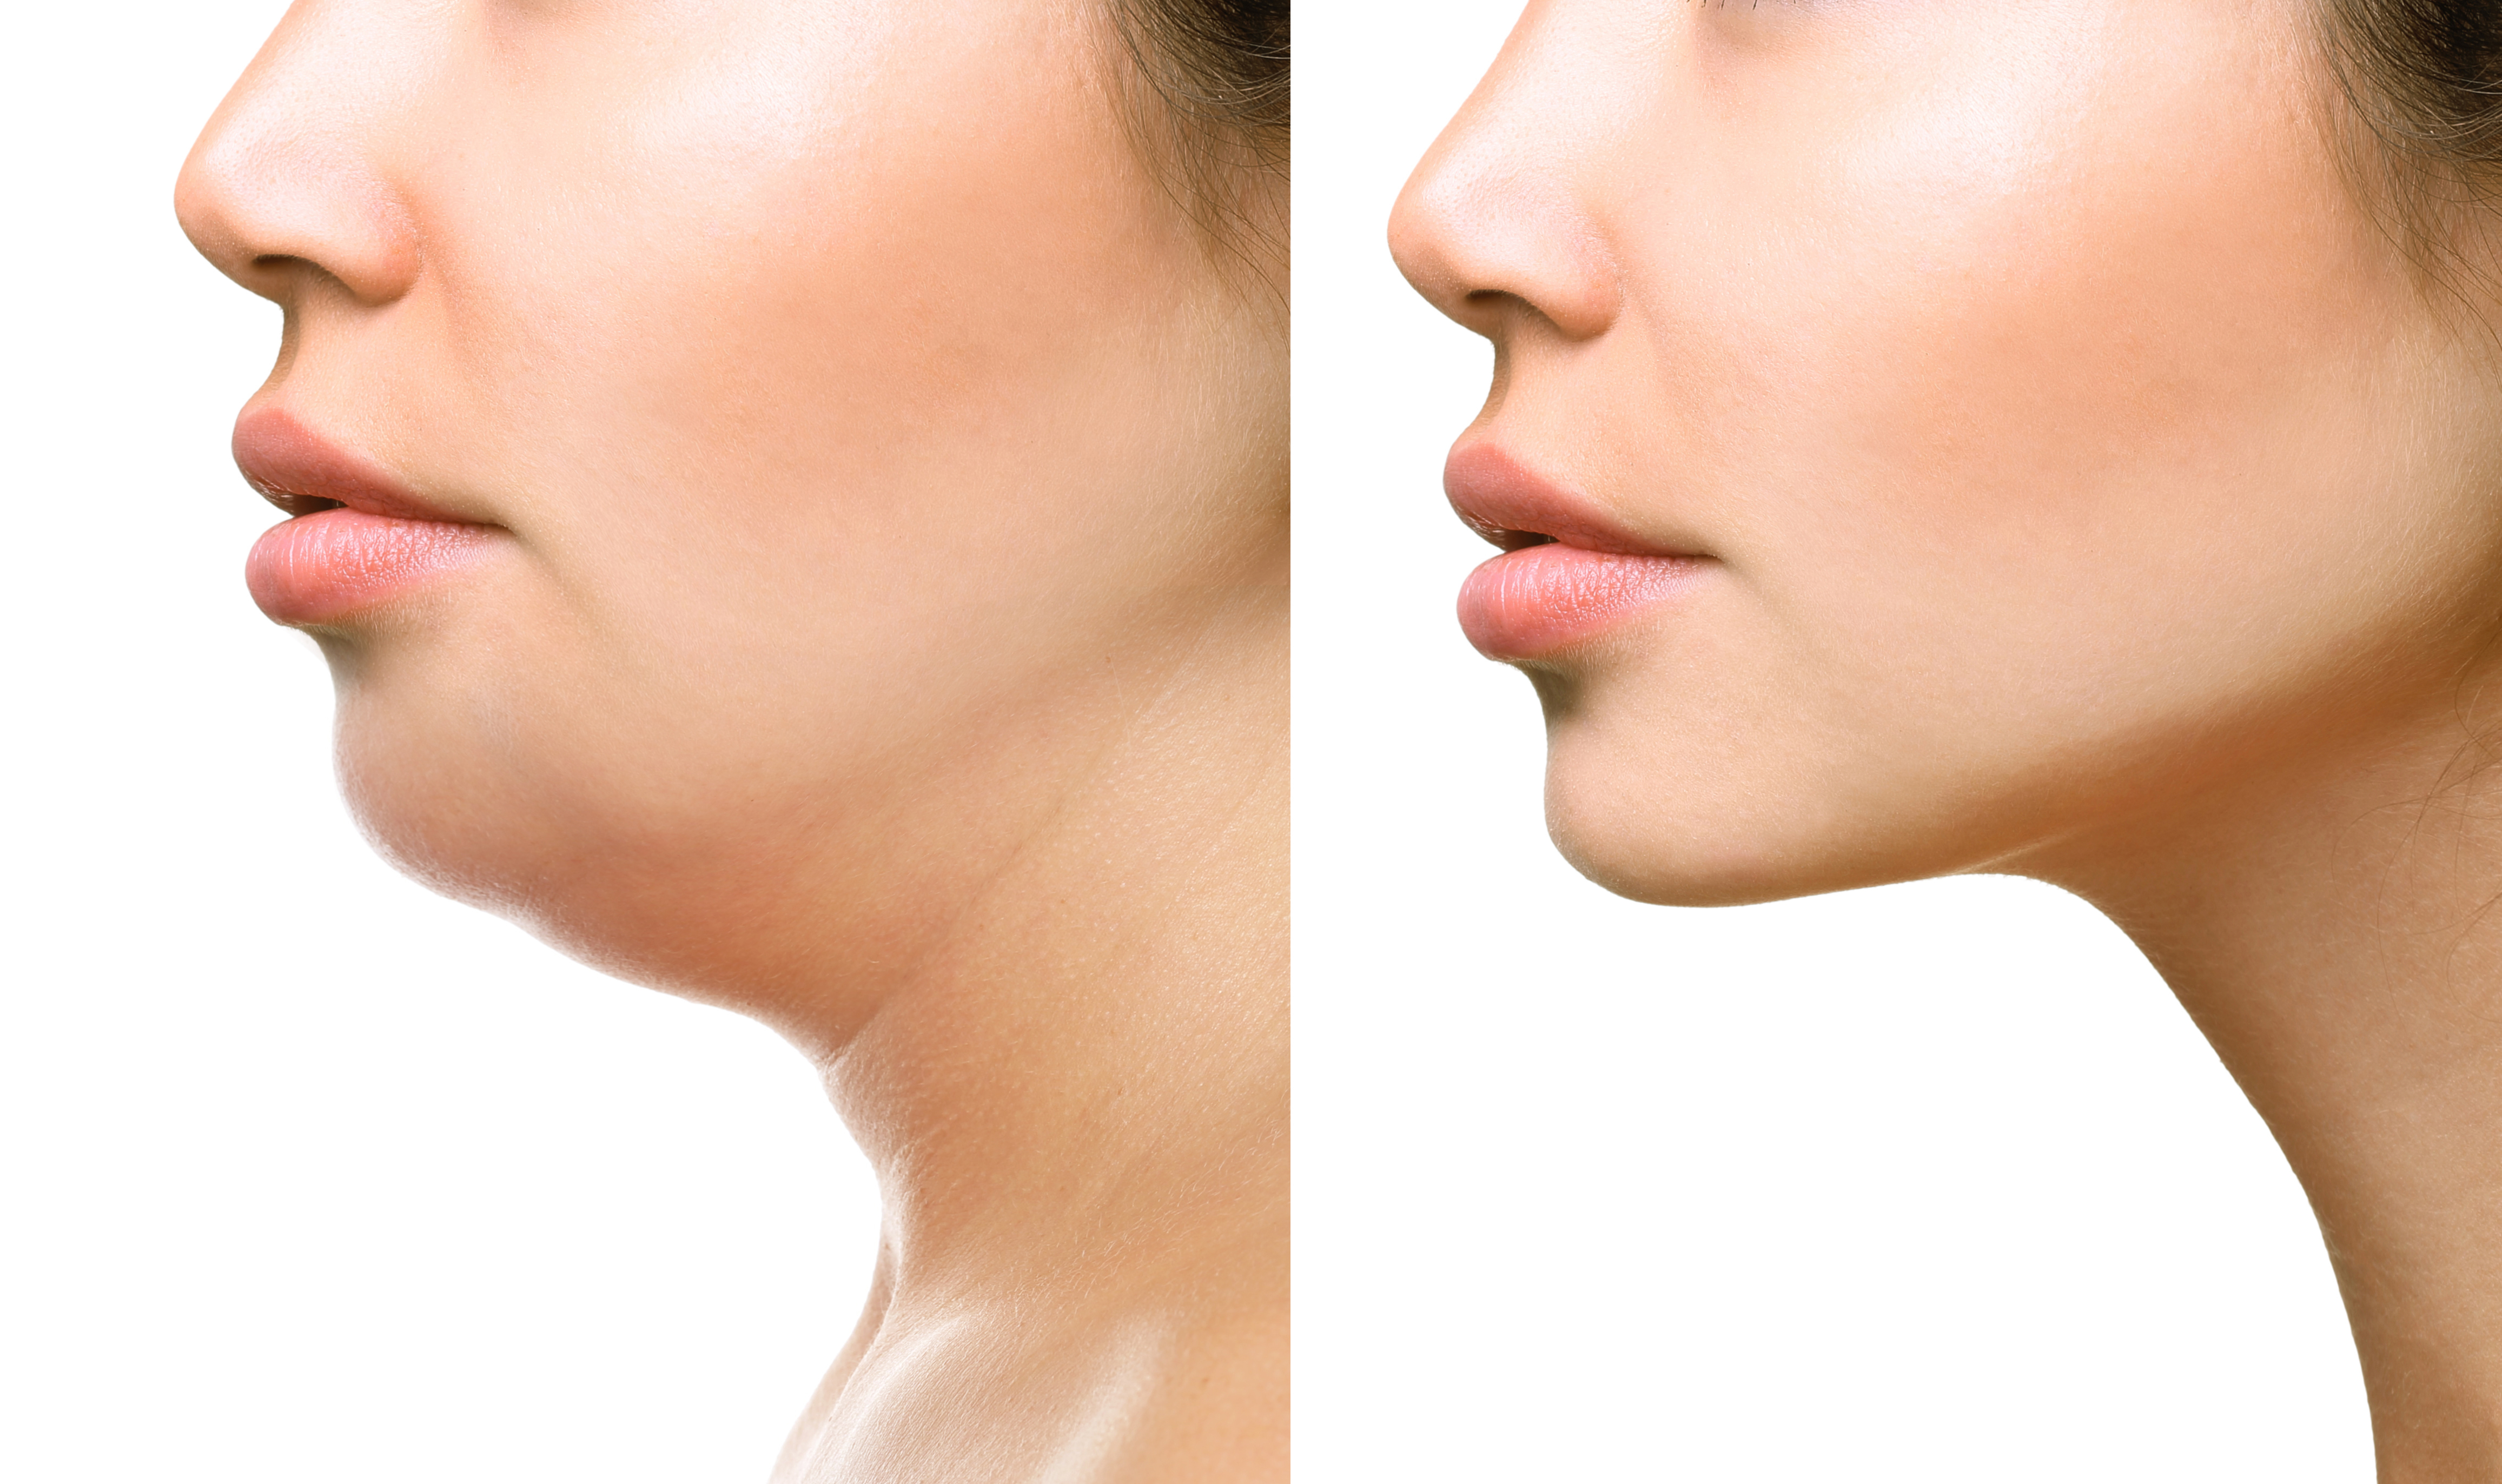 How to Get Rid of a Double Chin Without Surgery? 